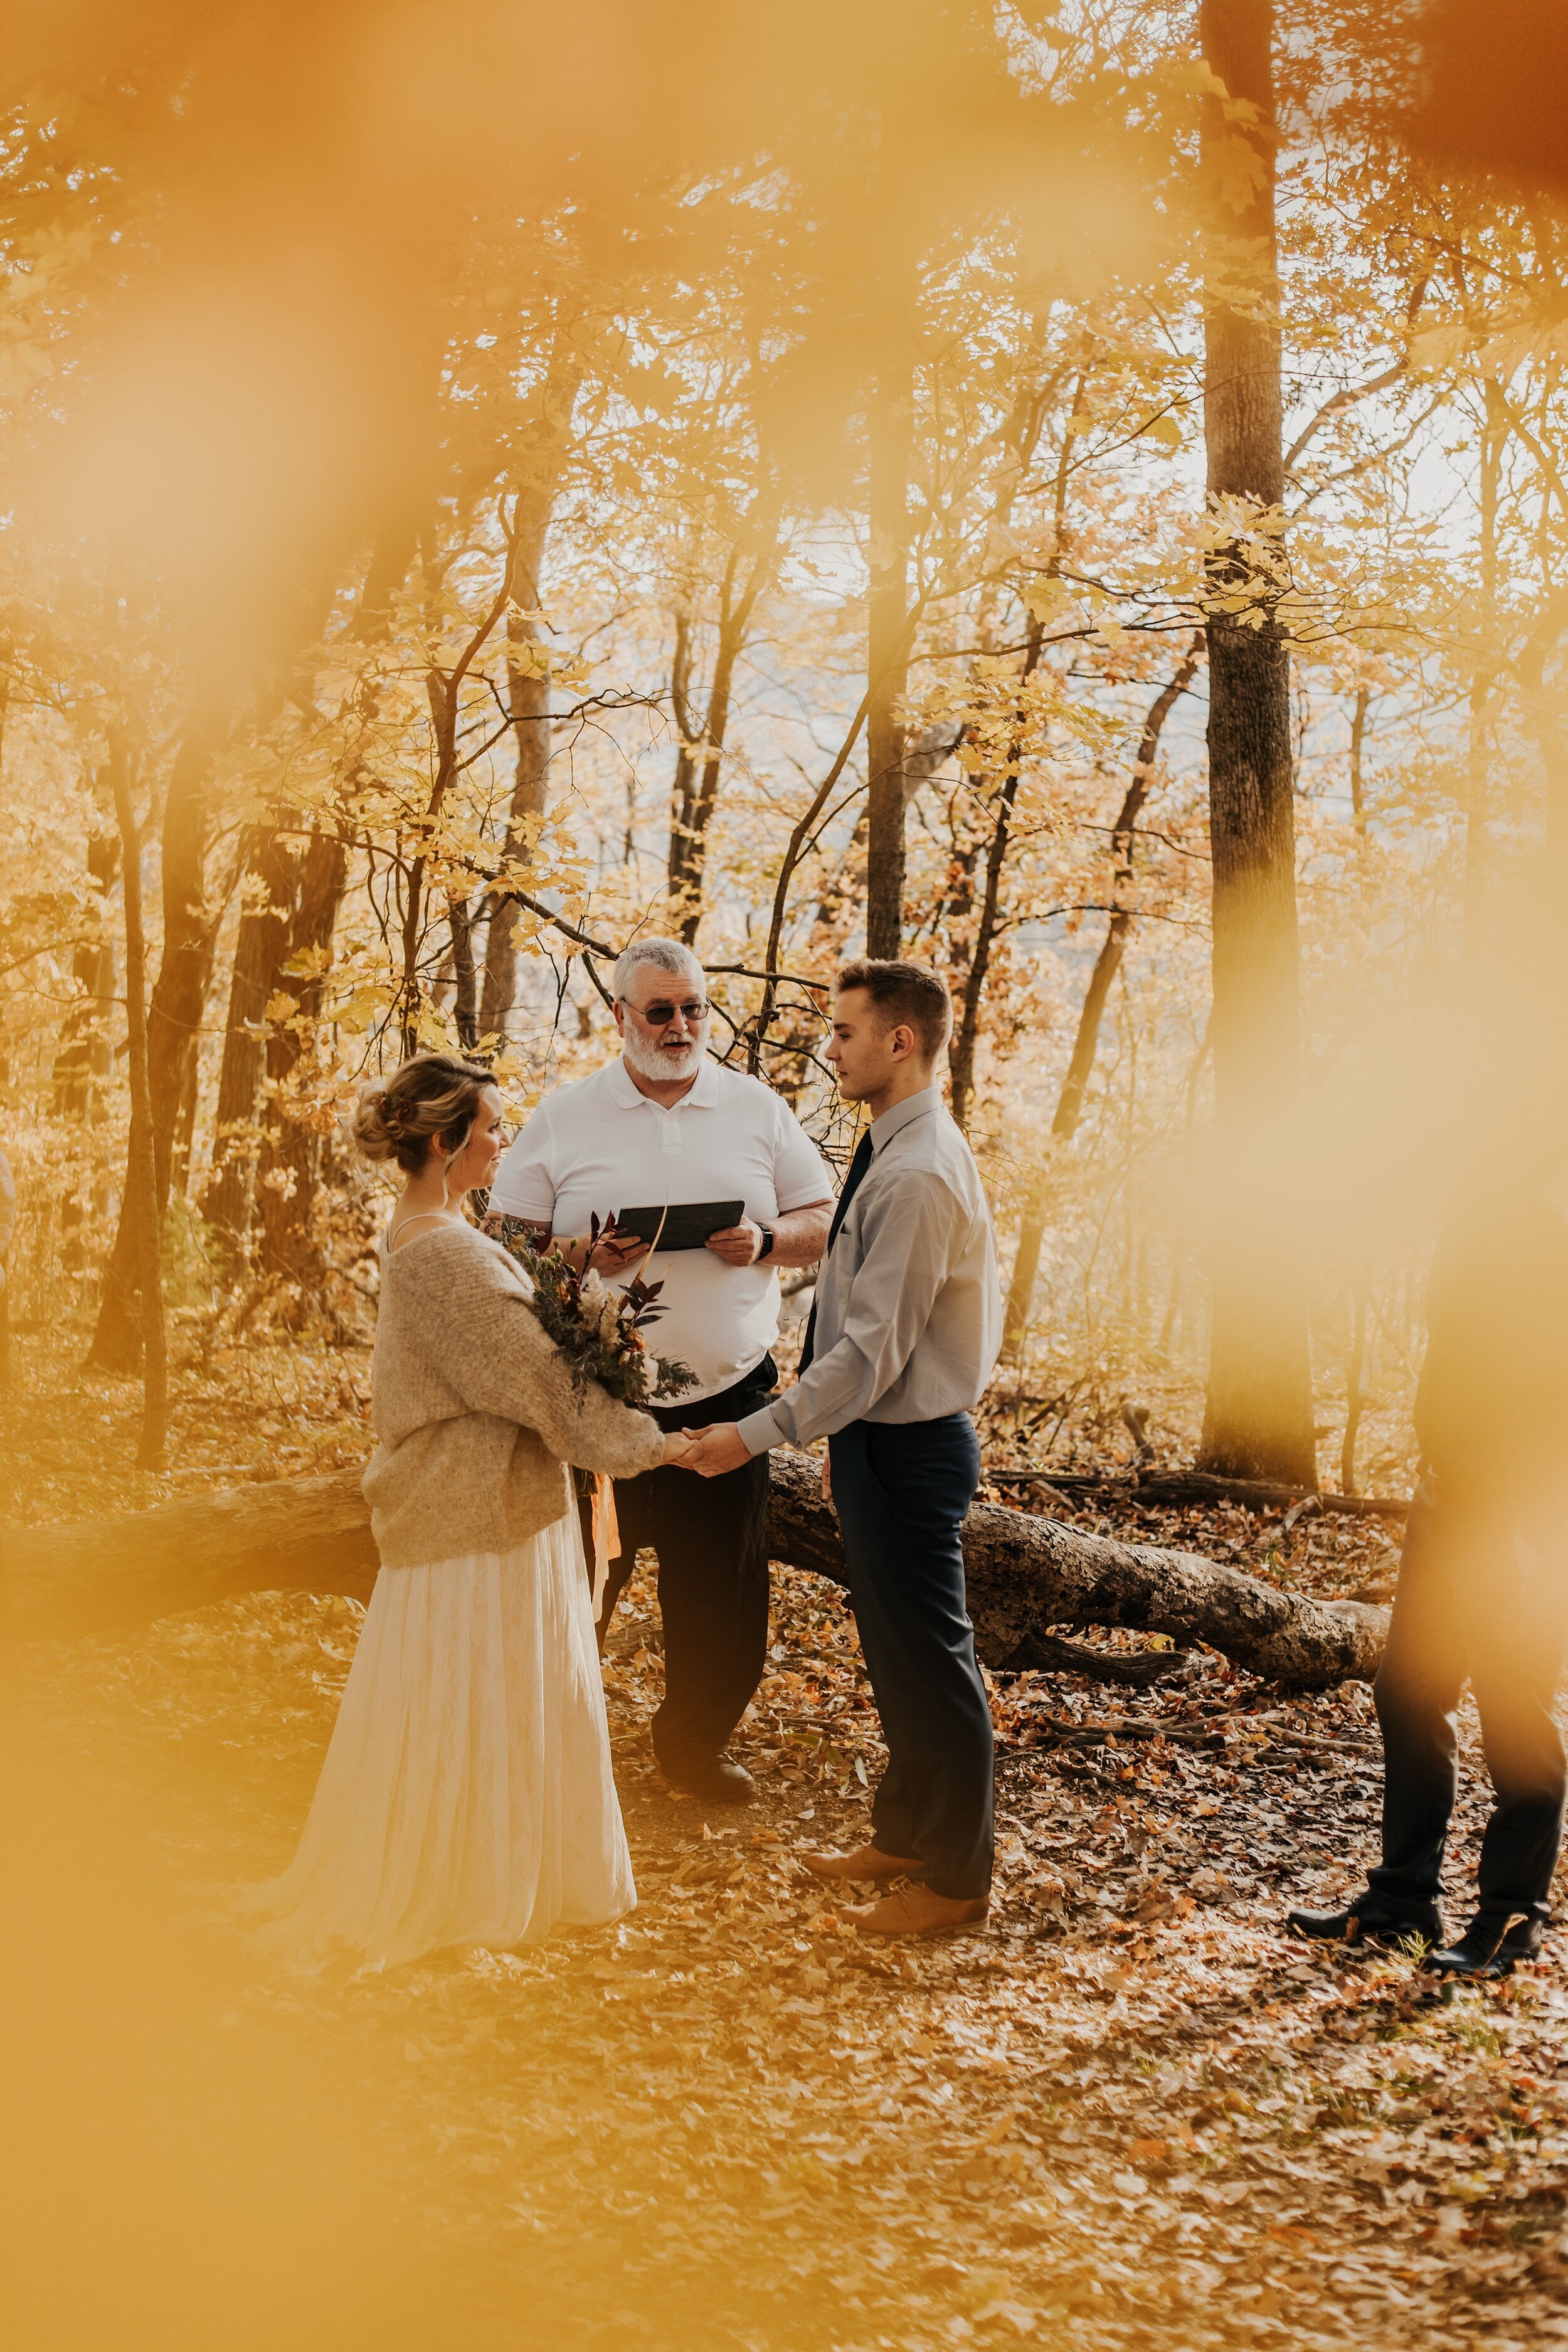 jessika-christine-photography-elopement-couples-outdoor-adventurous-session (4).jpg